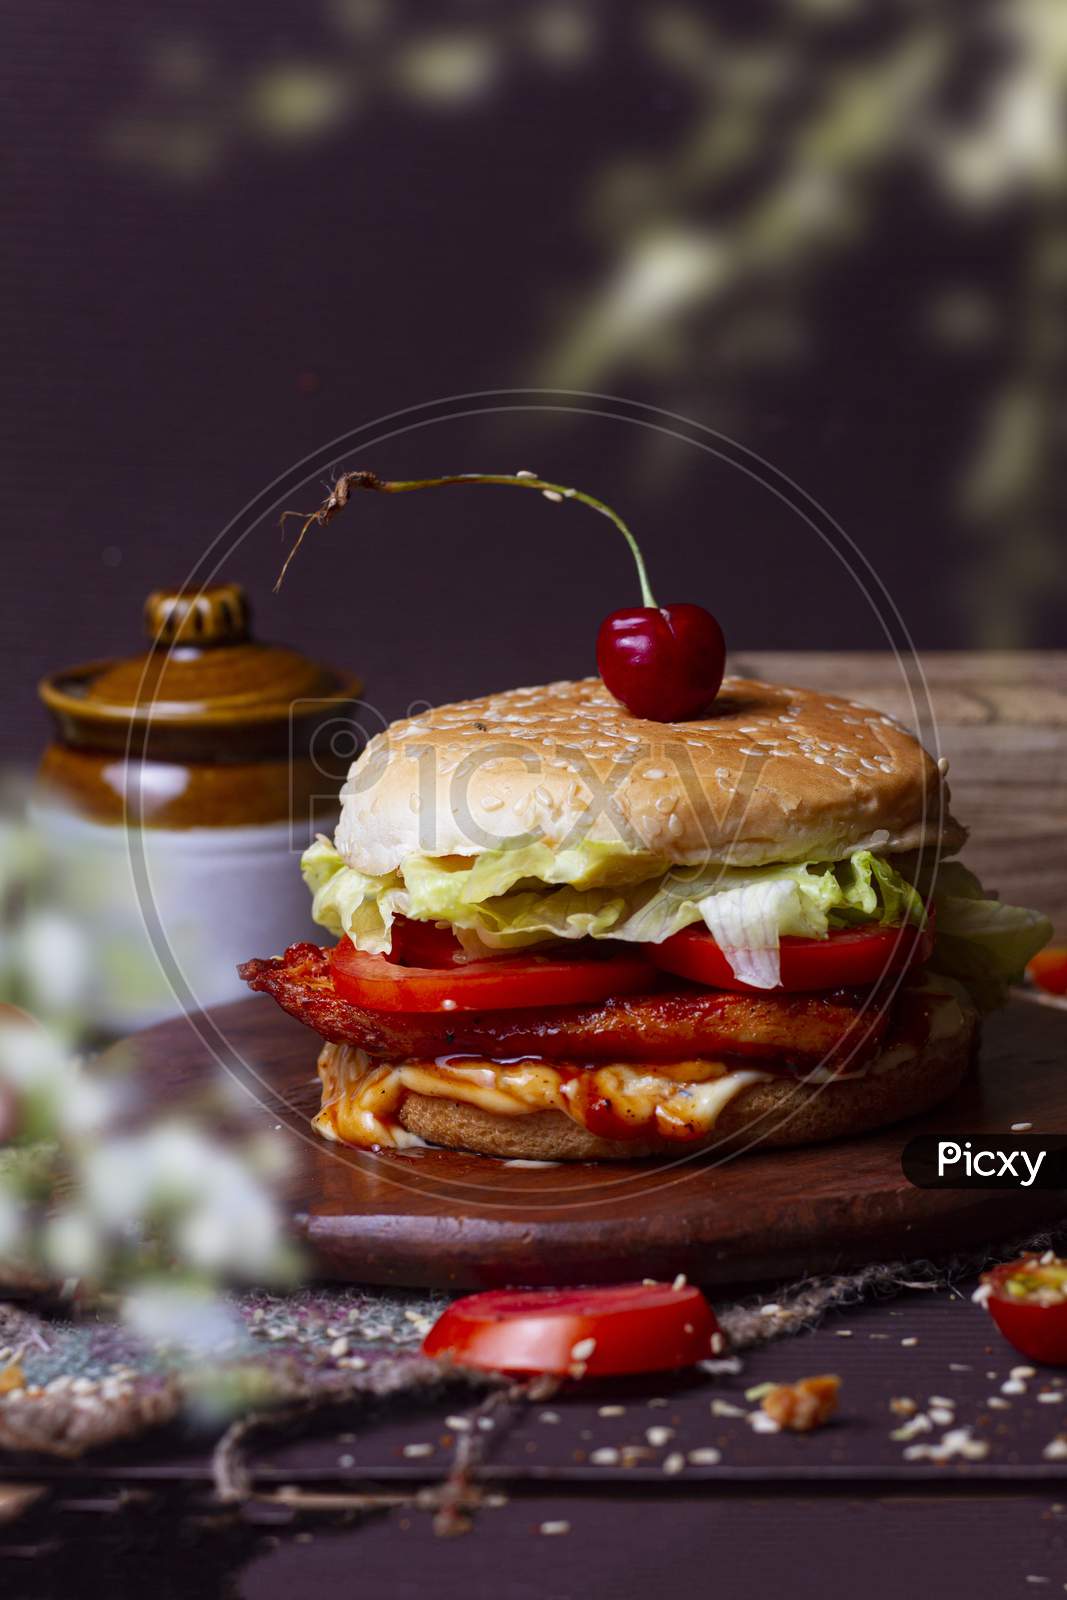 Juicy Chicken Grill Burger, Hamburger Or Cheeseburger With One Chicken Patties, With Sauce. Concept Of American Fast Food. Copy Space